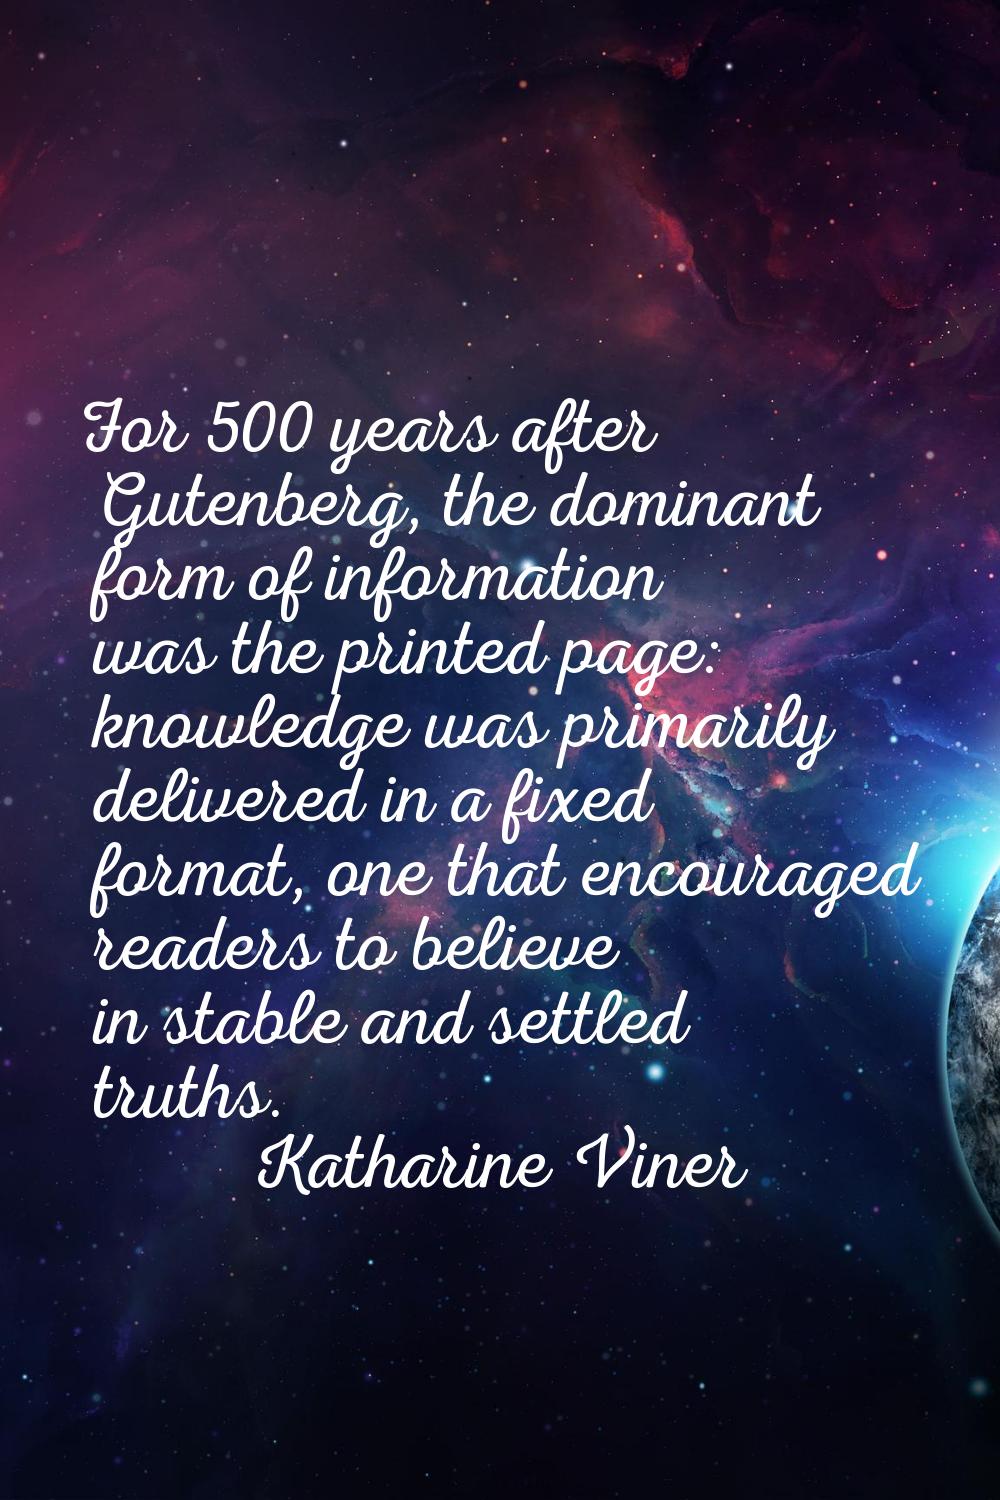 For 500 years after Gutenberg, the dominant form of information was the printed page: knowledge was